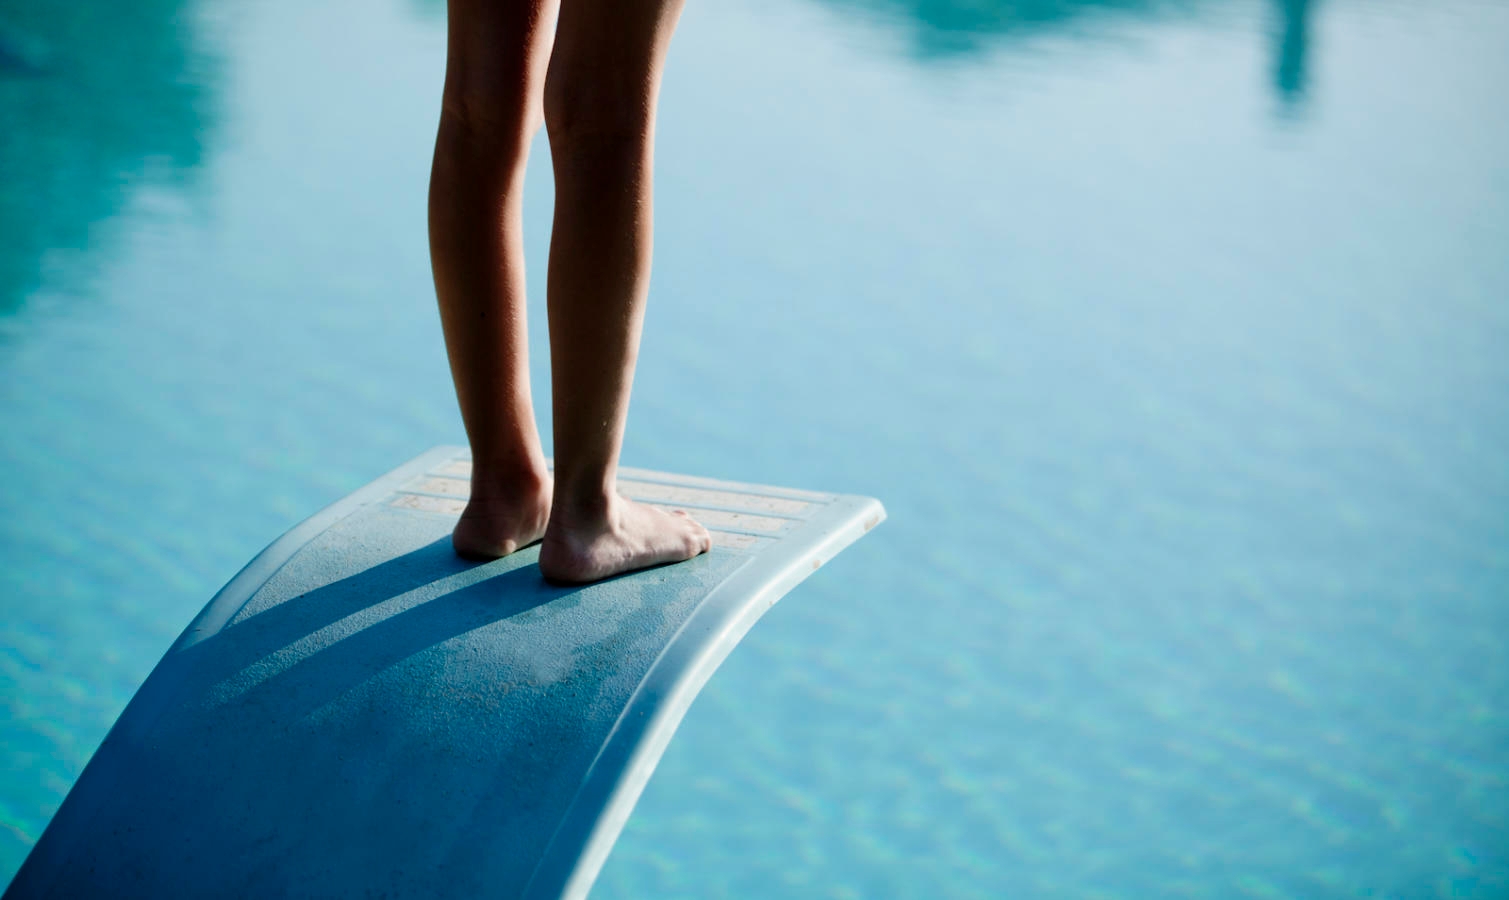 Shot of bare legs on diving board above blue water